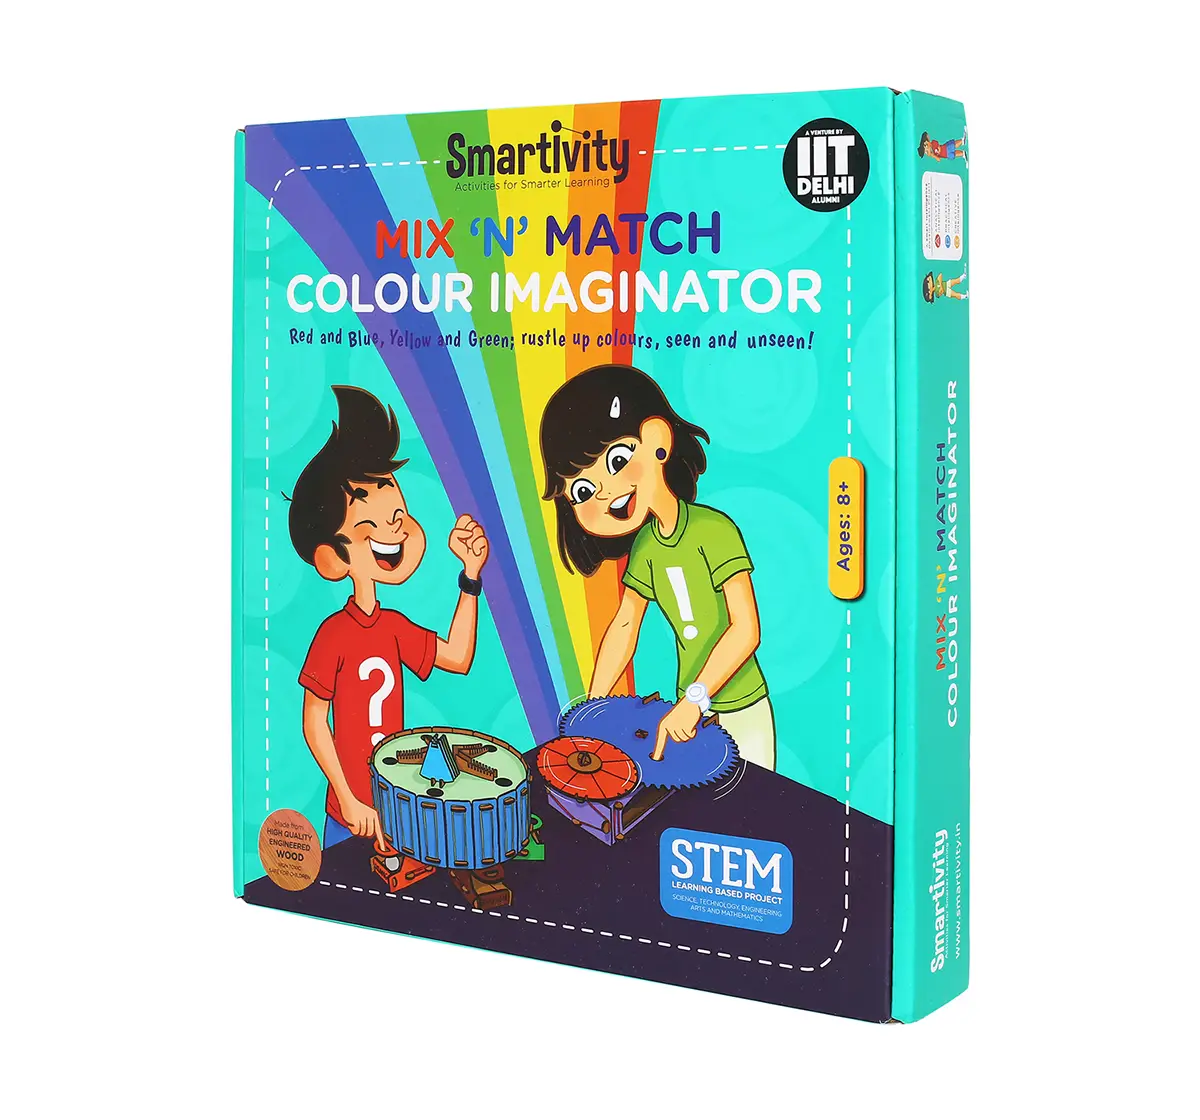 Smartivity Mix 'N' Match Colour Imaginator :  Stem, Learning, Educational and Construction Activity Toy Gift for Kids age 8Y+ (Multi-Color)